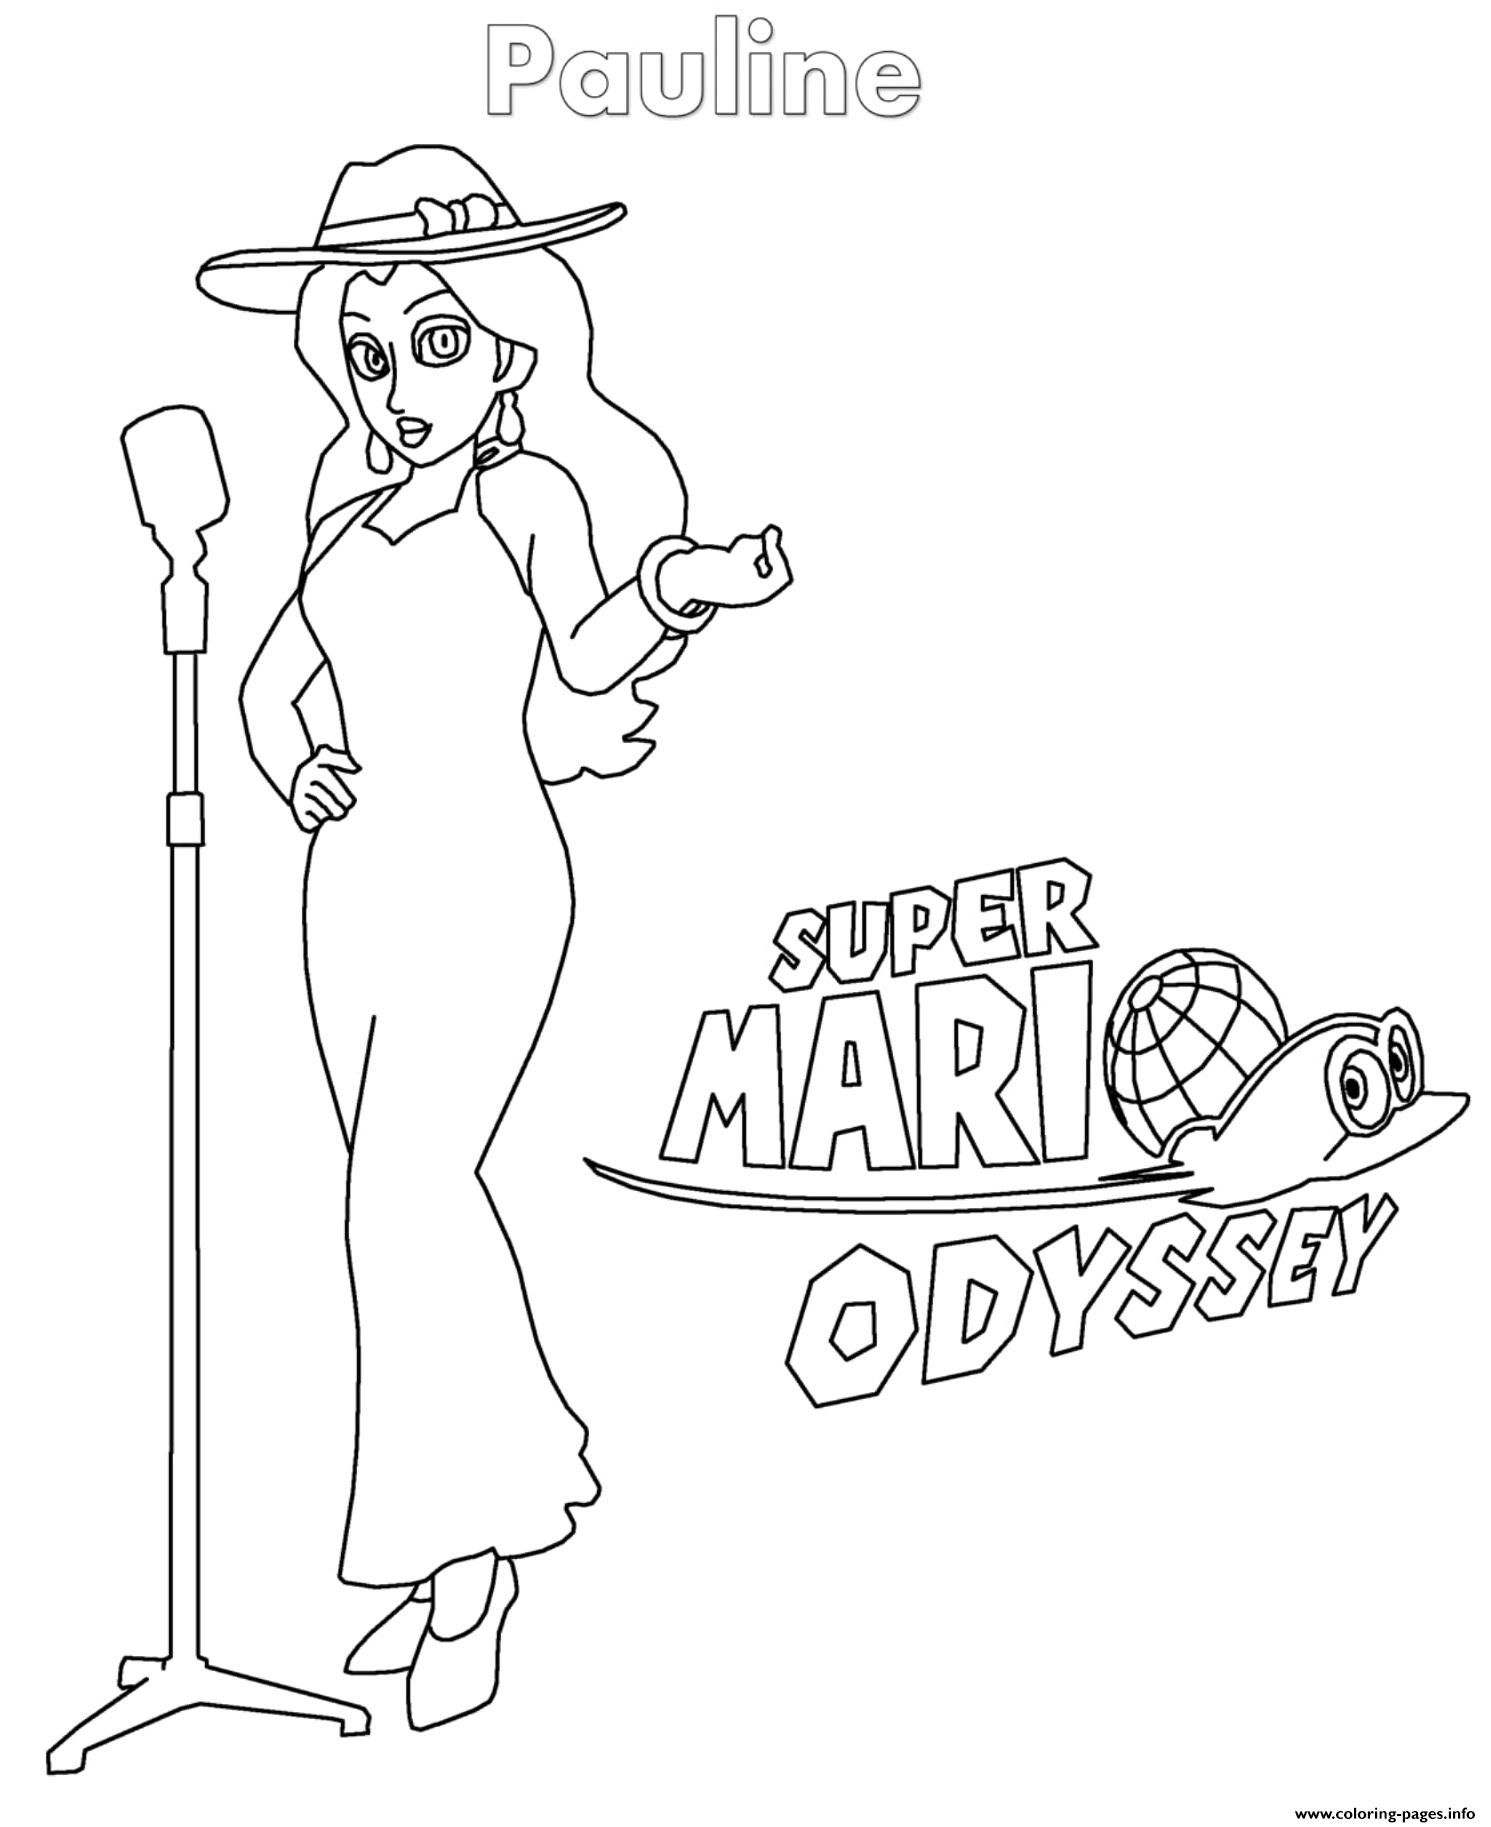 75 Free Printable Mario Odyssey Coloring Pages | KIDS COLORING